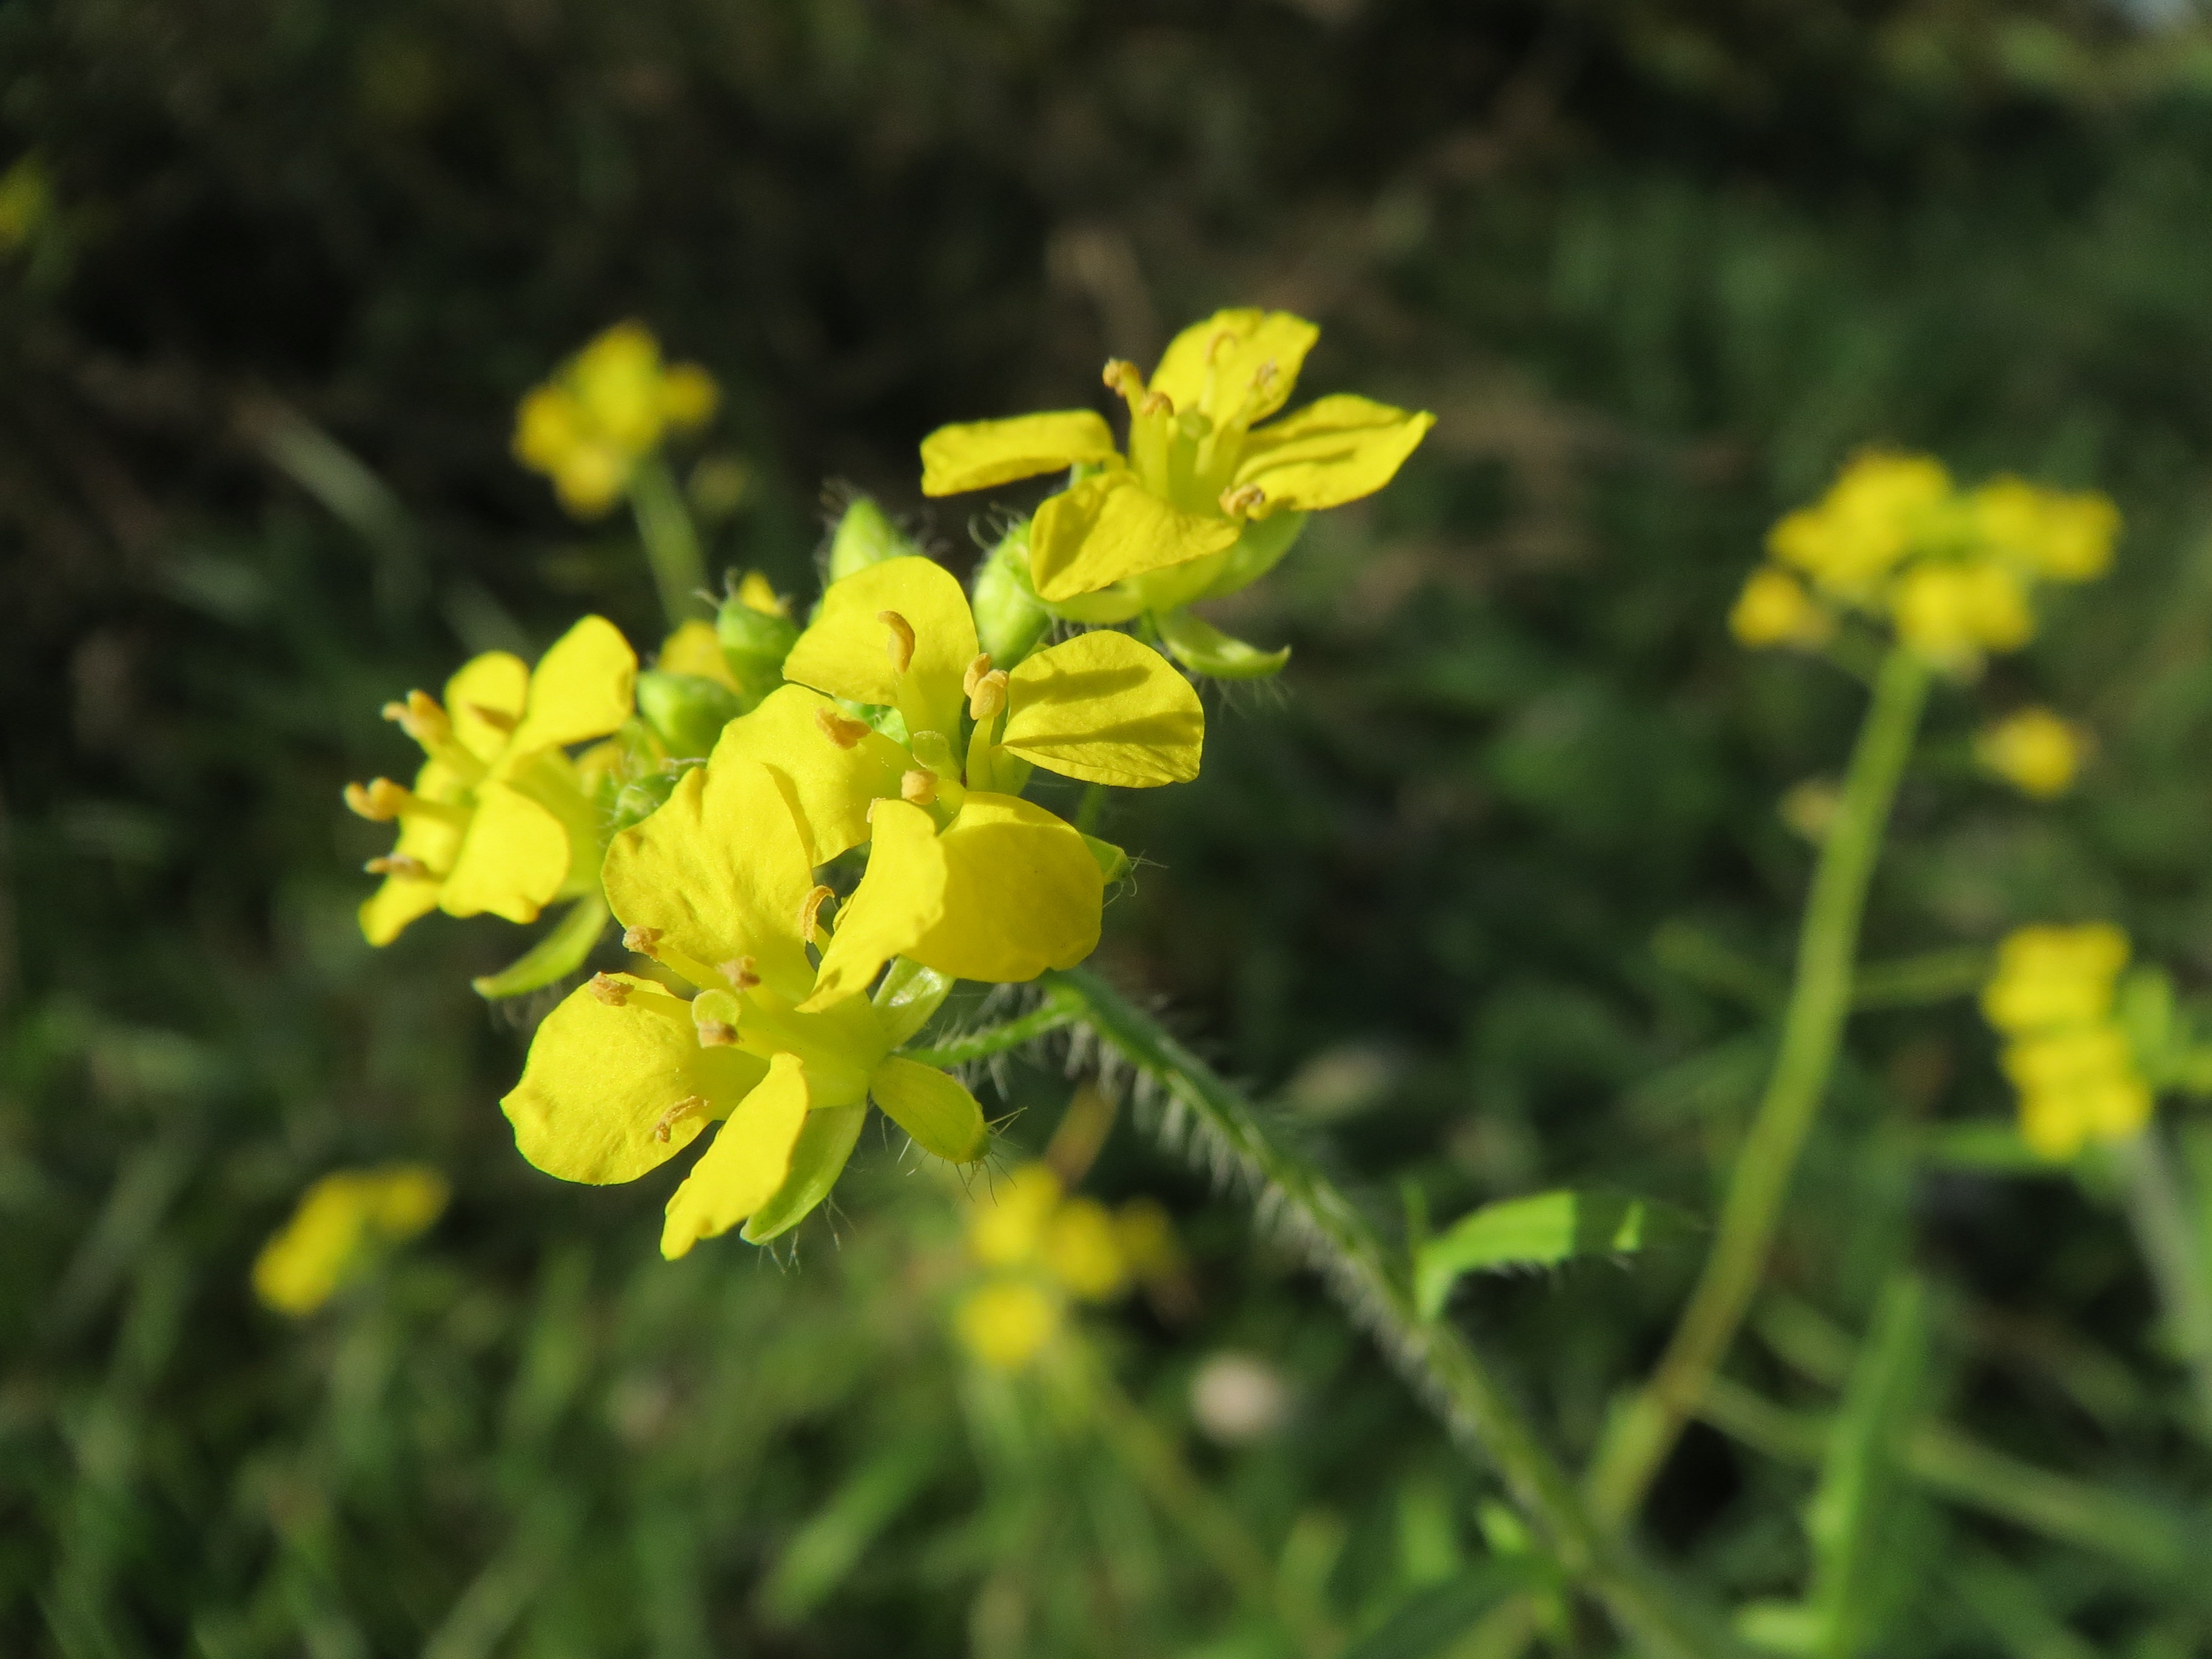 Free Images - sisymbrium loeselii 848835